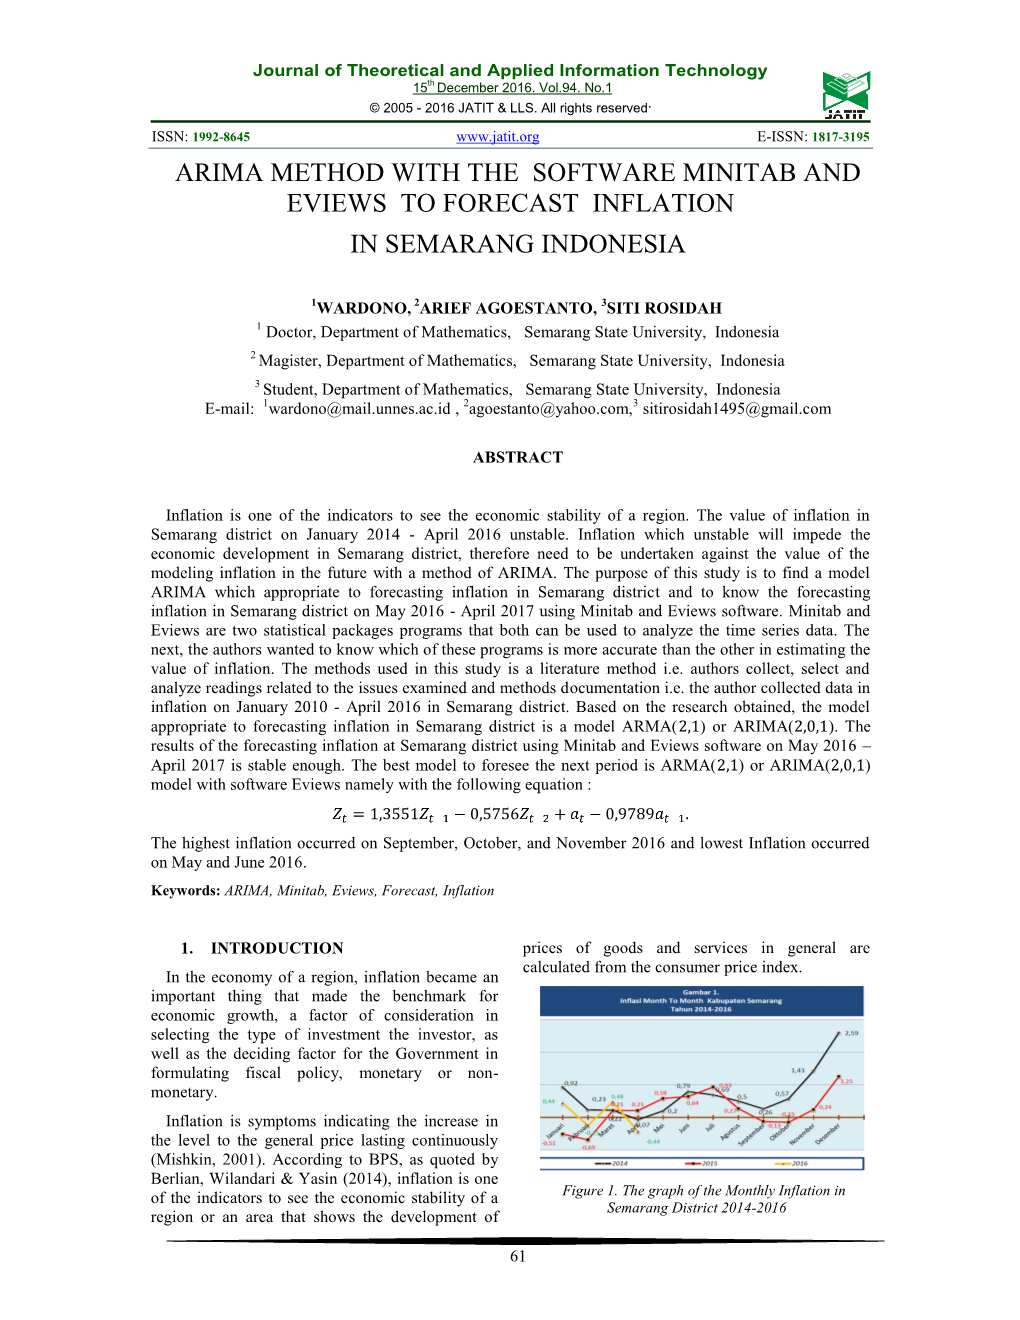 Arima Method with the Software Minitab and Eviews to Forecast Inflation in Semarang Indonesia